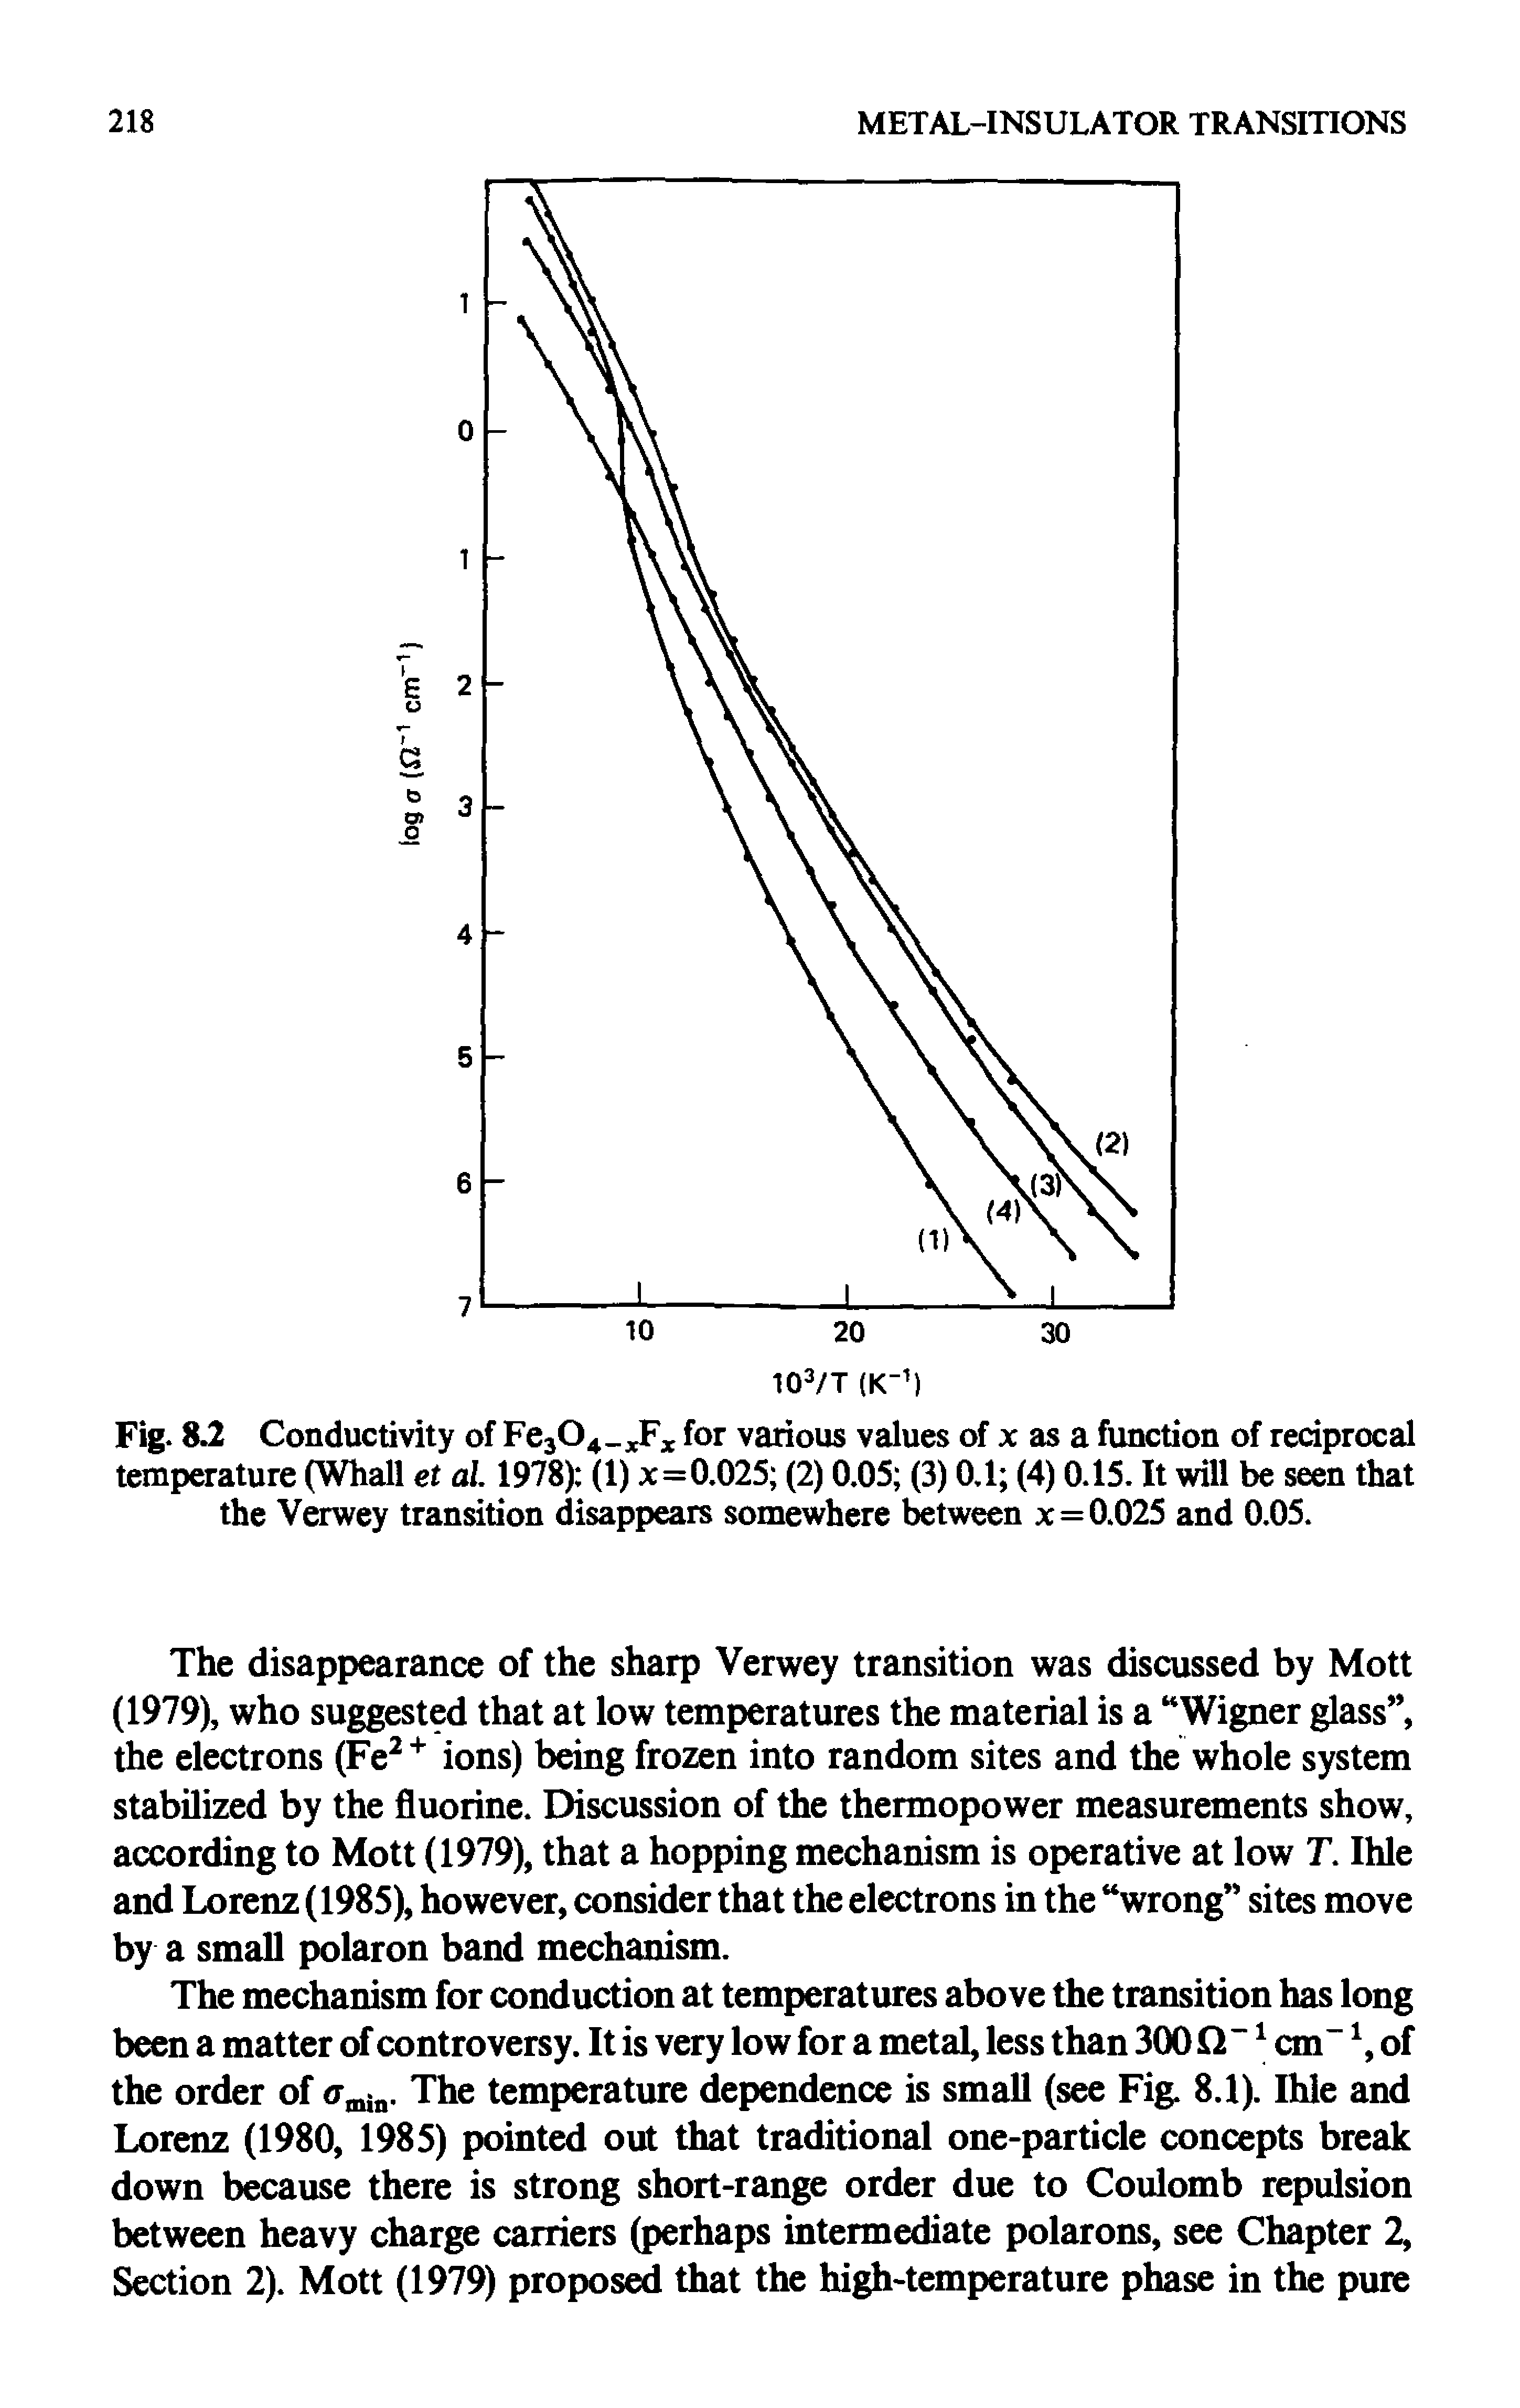 Fig. 8.2 Conductivity of Fe304 xFx for various values of x as a function of reciprocal temperature (Whall et al 1978) (1) x=0.025 (2) 0.05 (3) 0.1 (4) 0.15. It will be seen that the Verwey transition disappears somewhere between x = 0.025 and 0.05.